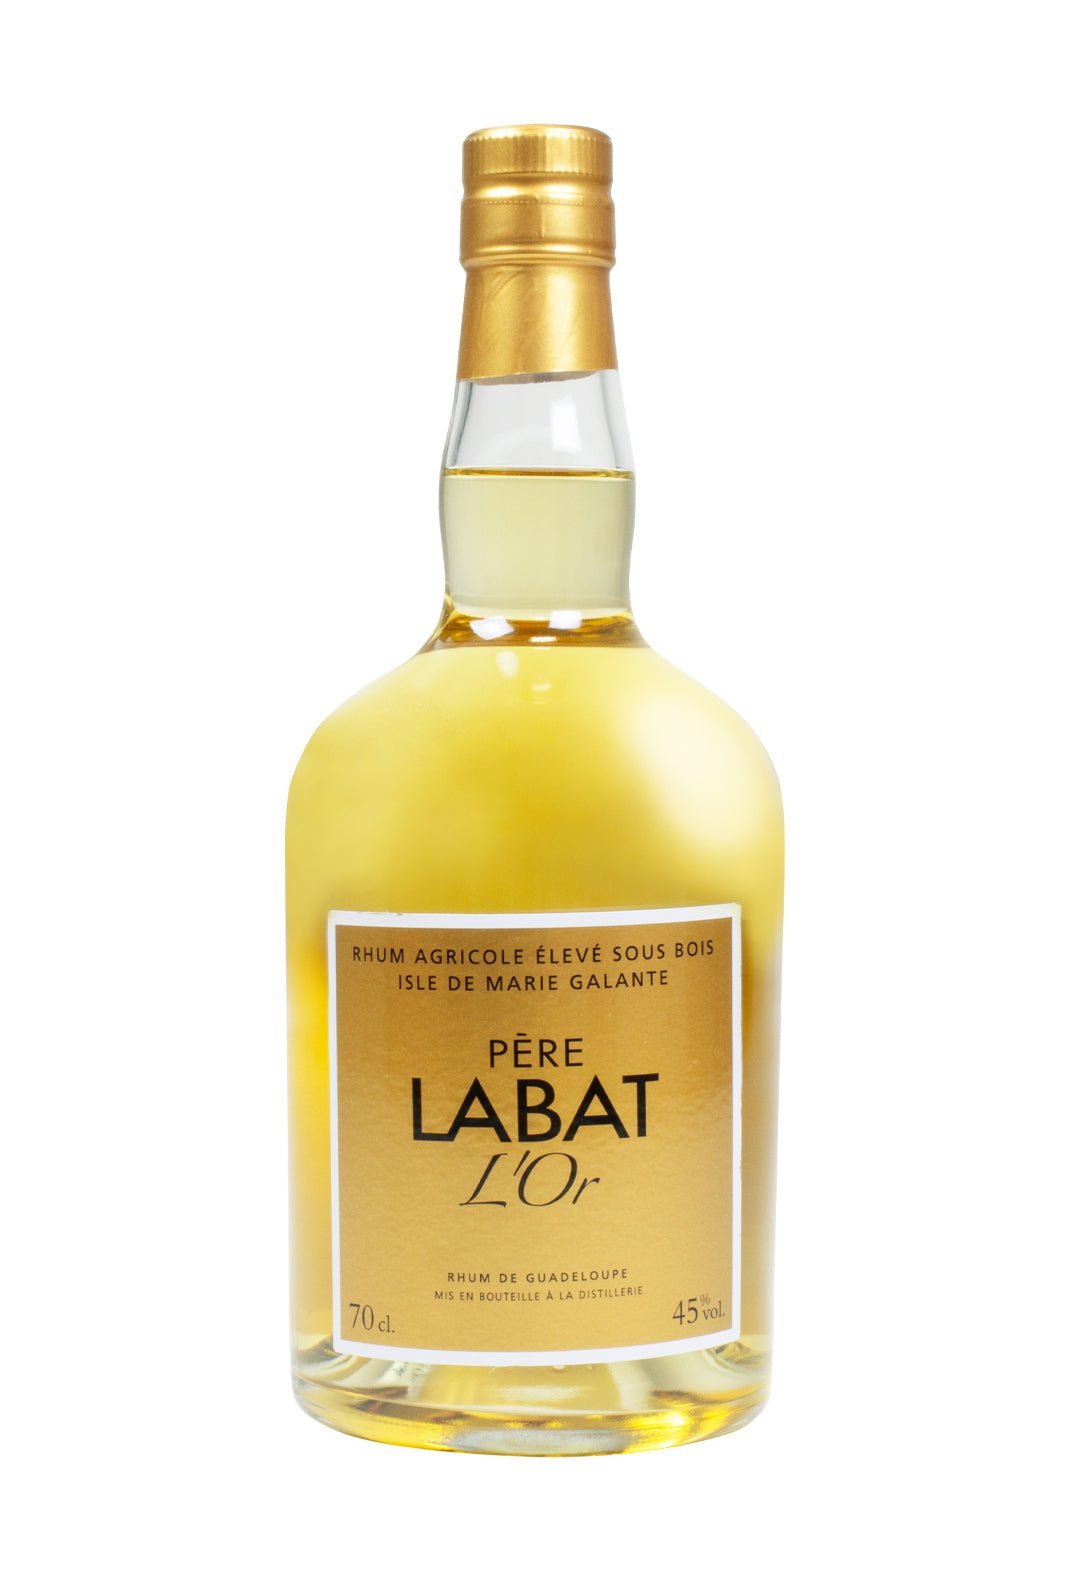 Labat Rum l'Or Amber Guadeloupe 45% 700ml | Rum | Shop online at Spirits of France